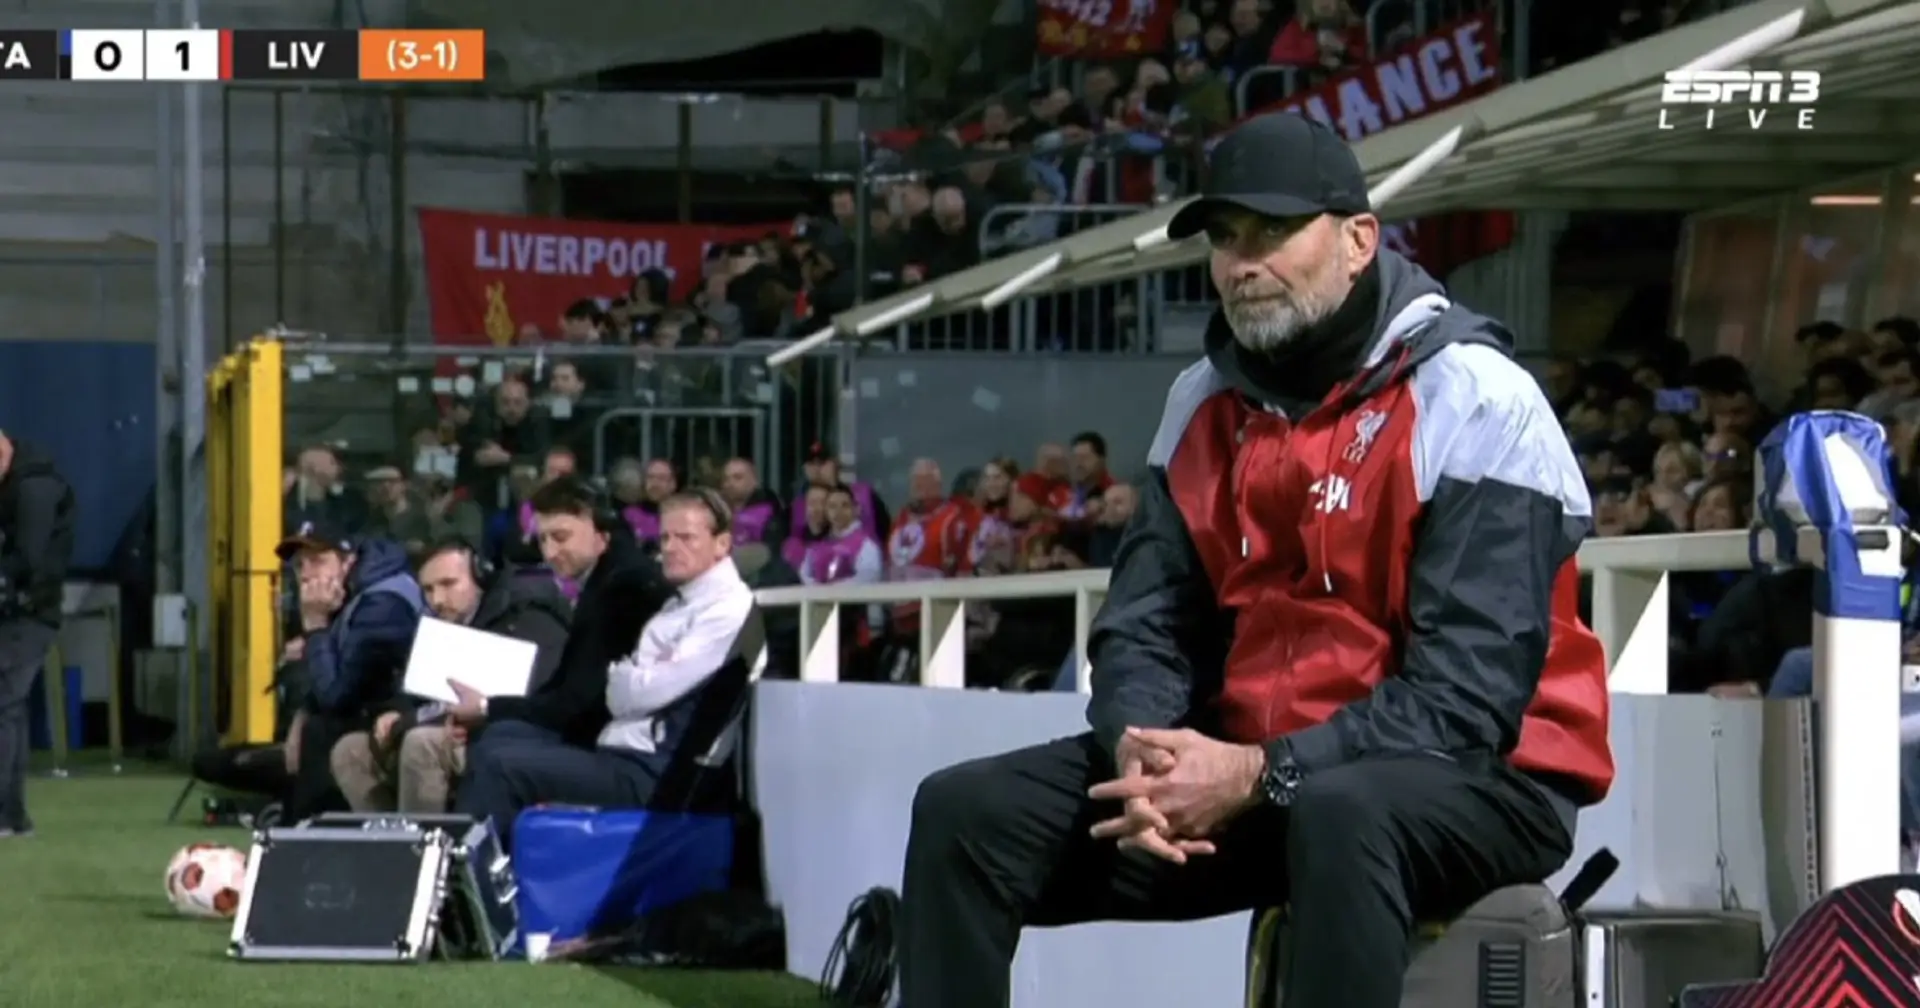 Spotted: Jurgen Klopp's reaction as his last European game with Liverpool ended